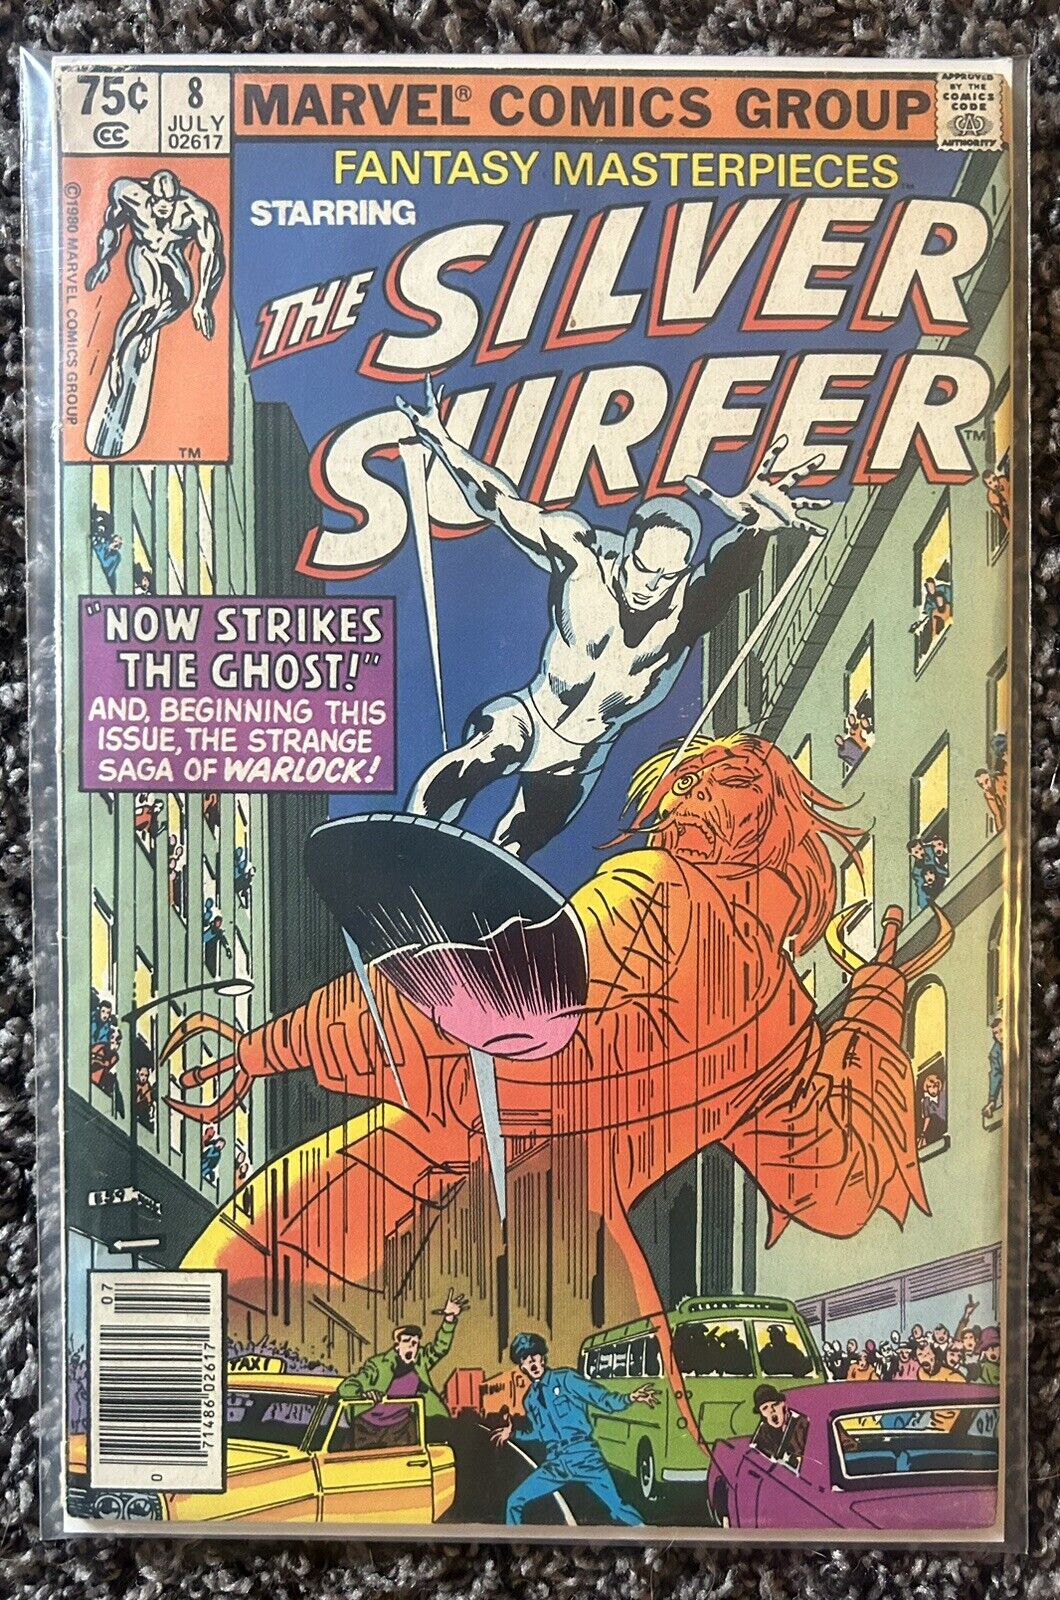 Fantasy Masterpieces Silver Surfer (1980) #8 - Third appearance of Mephisto